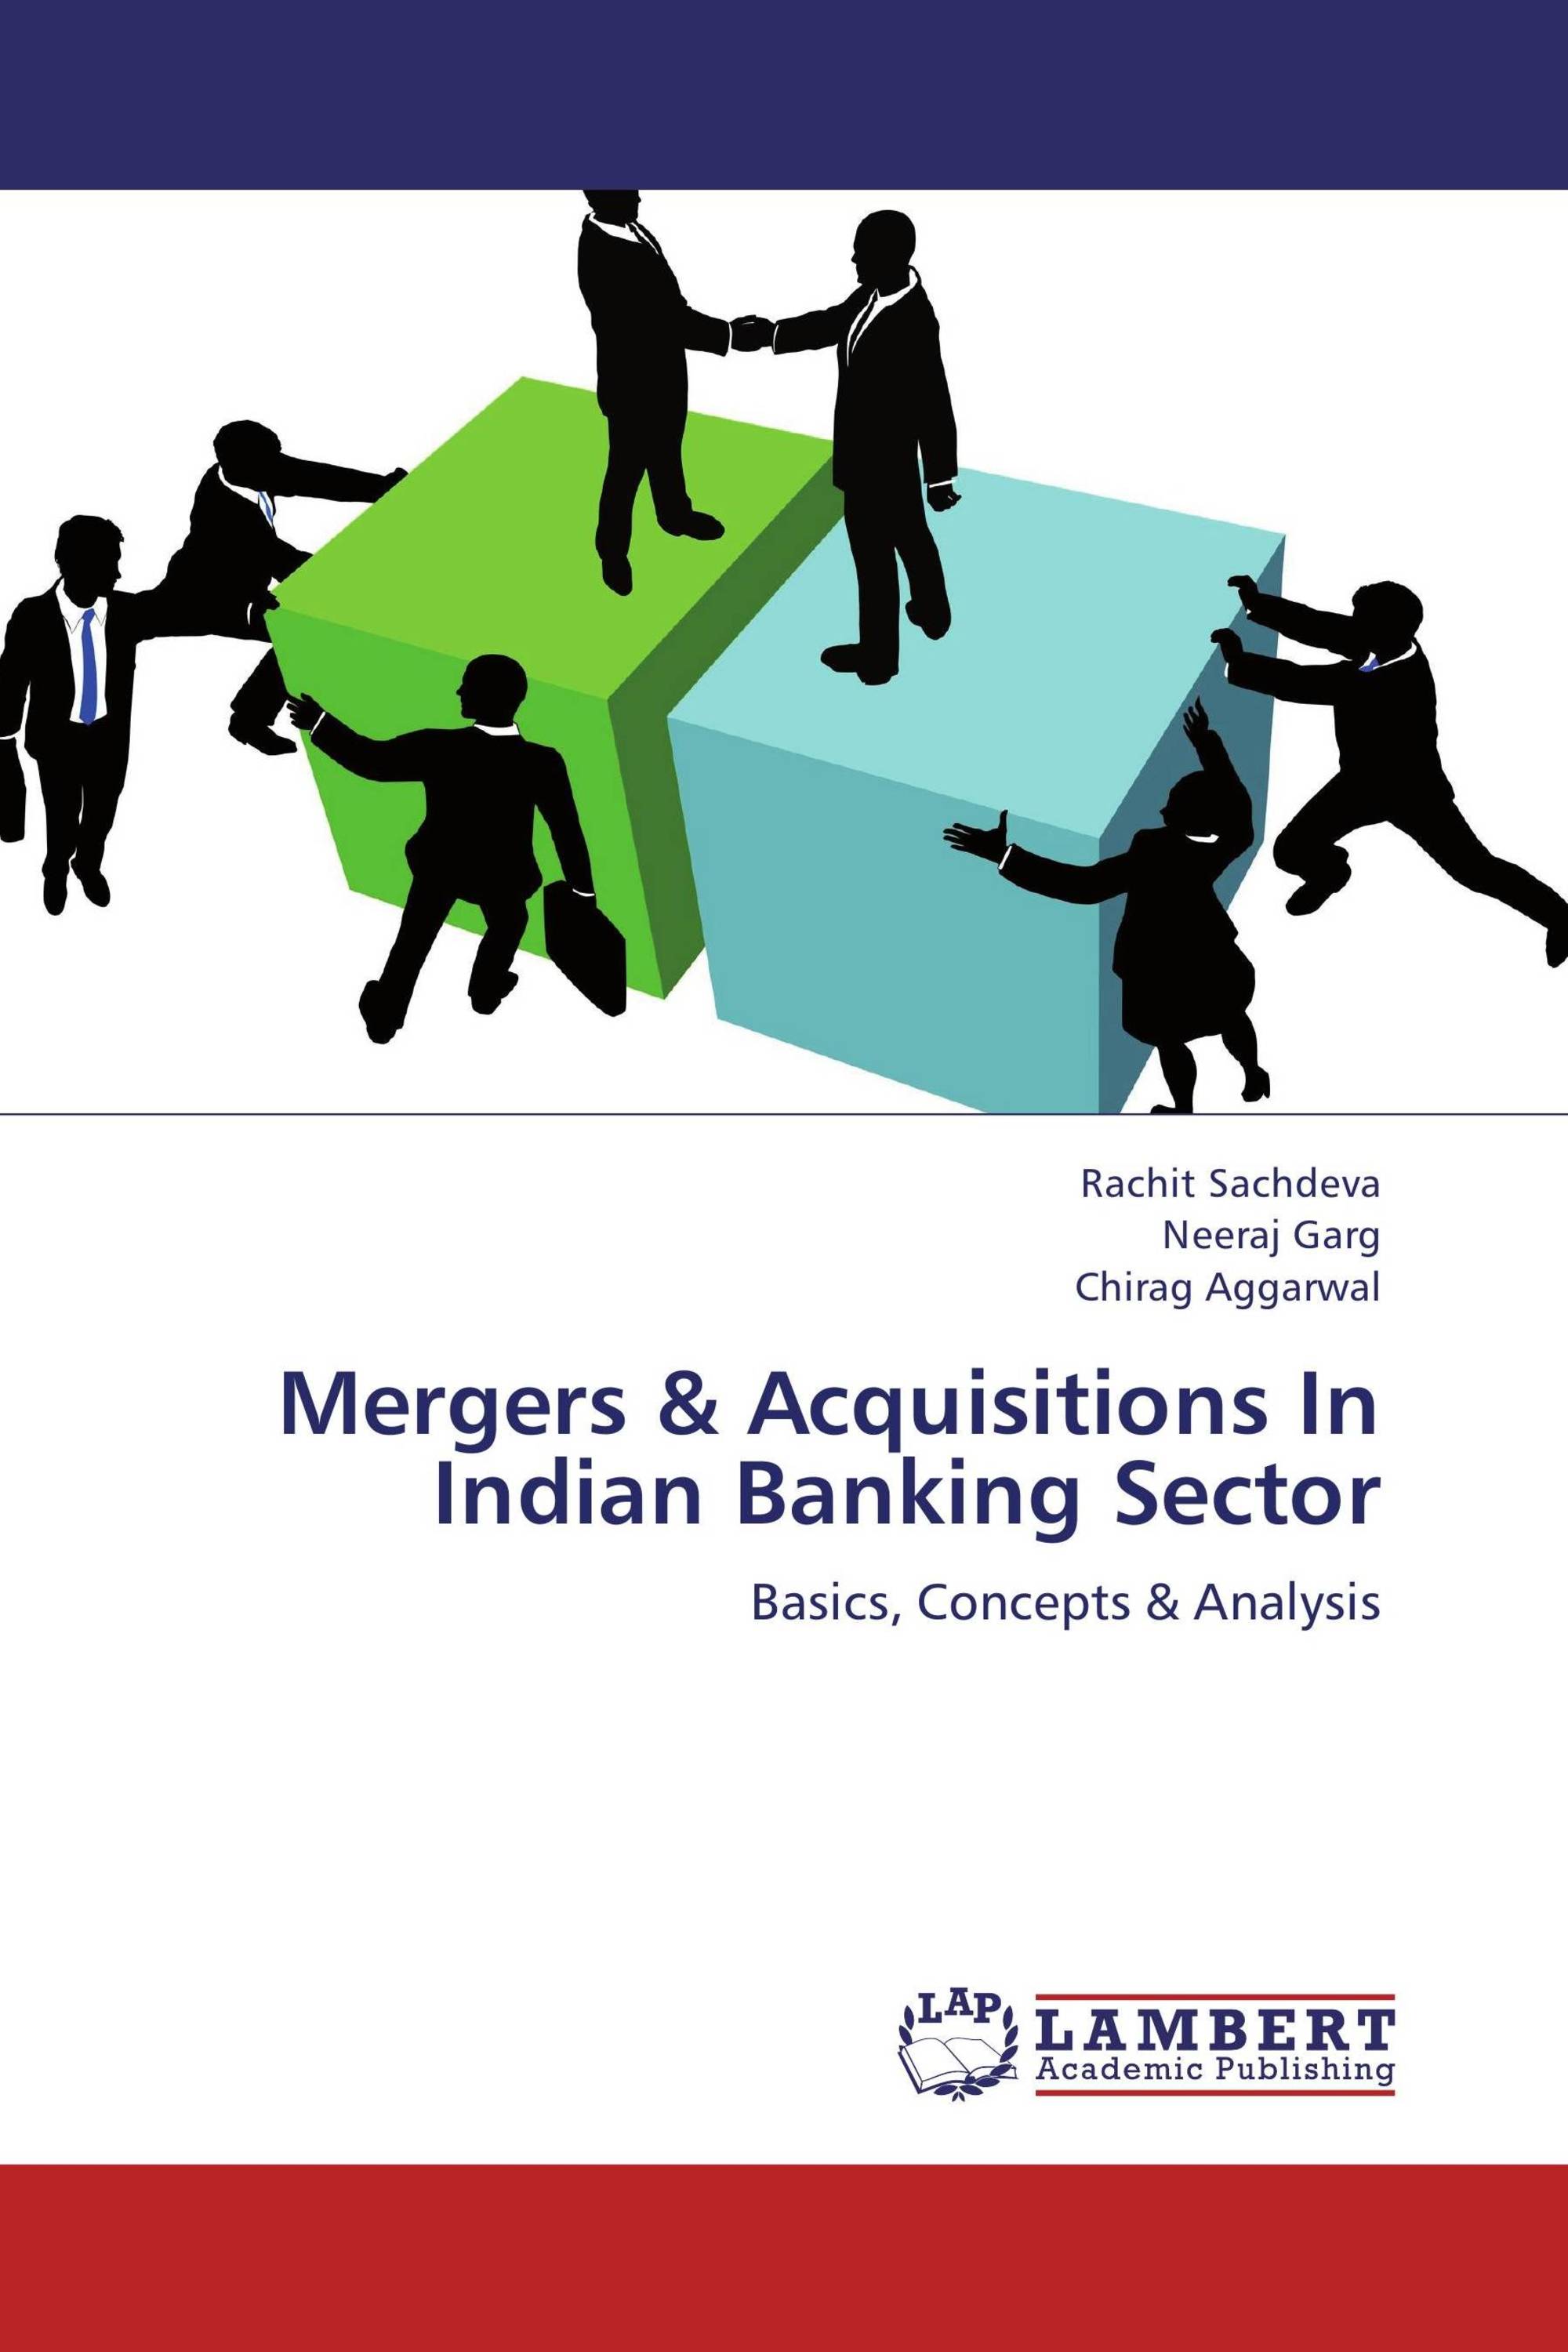 recent case study on mergers and acquisitions in india